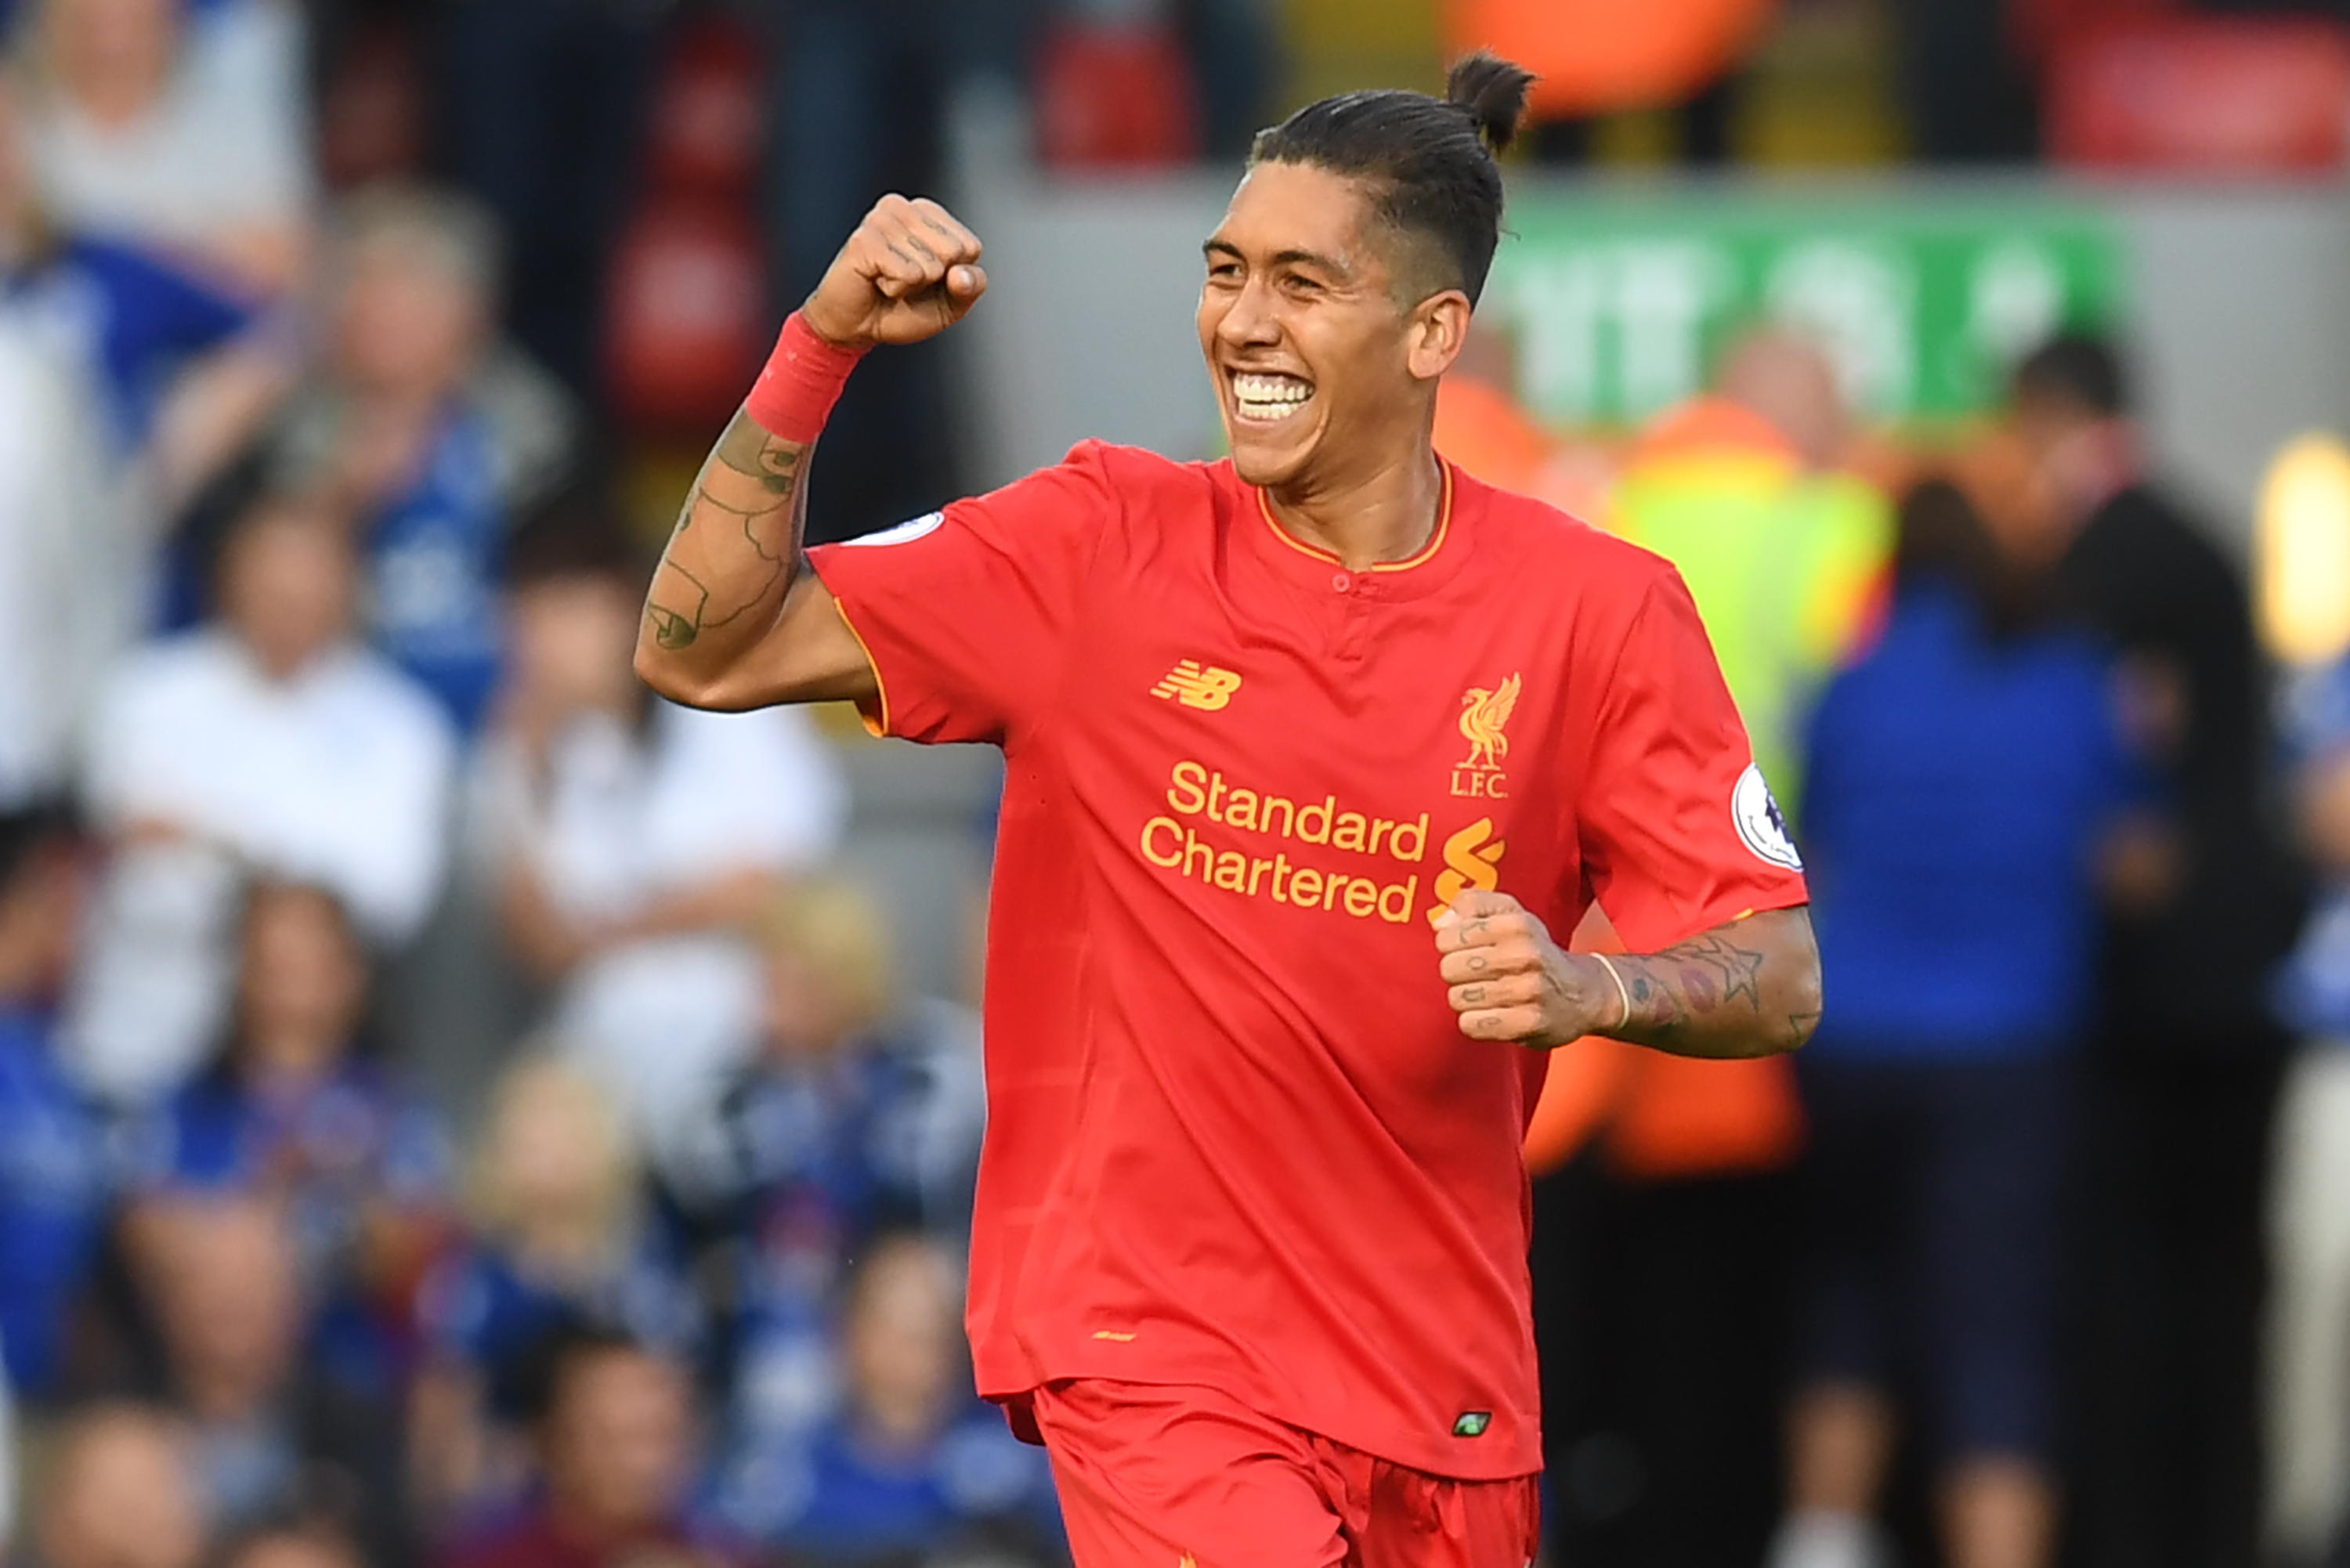 Liverpool's Brazilian midfielder Roberto Firmino celebrates after scoring the opening goal of the English Premier League football match between Liverpool and Leicester City at Anfield in Liverpool, north west England on September 10, 2016. / AFP / Paul ELLIS / RESTRICTED TO EDITORIAL USE. No use with unauthorized audio, video, data, fixture lists, club/league logos or 'live' services. Online in-match use limited to 75 images, no video emulation. No use in betting, games or single club/league/player publications.  /         (Photo credit should read PAUL ELLIS/AFP/Getty Images)